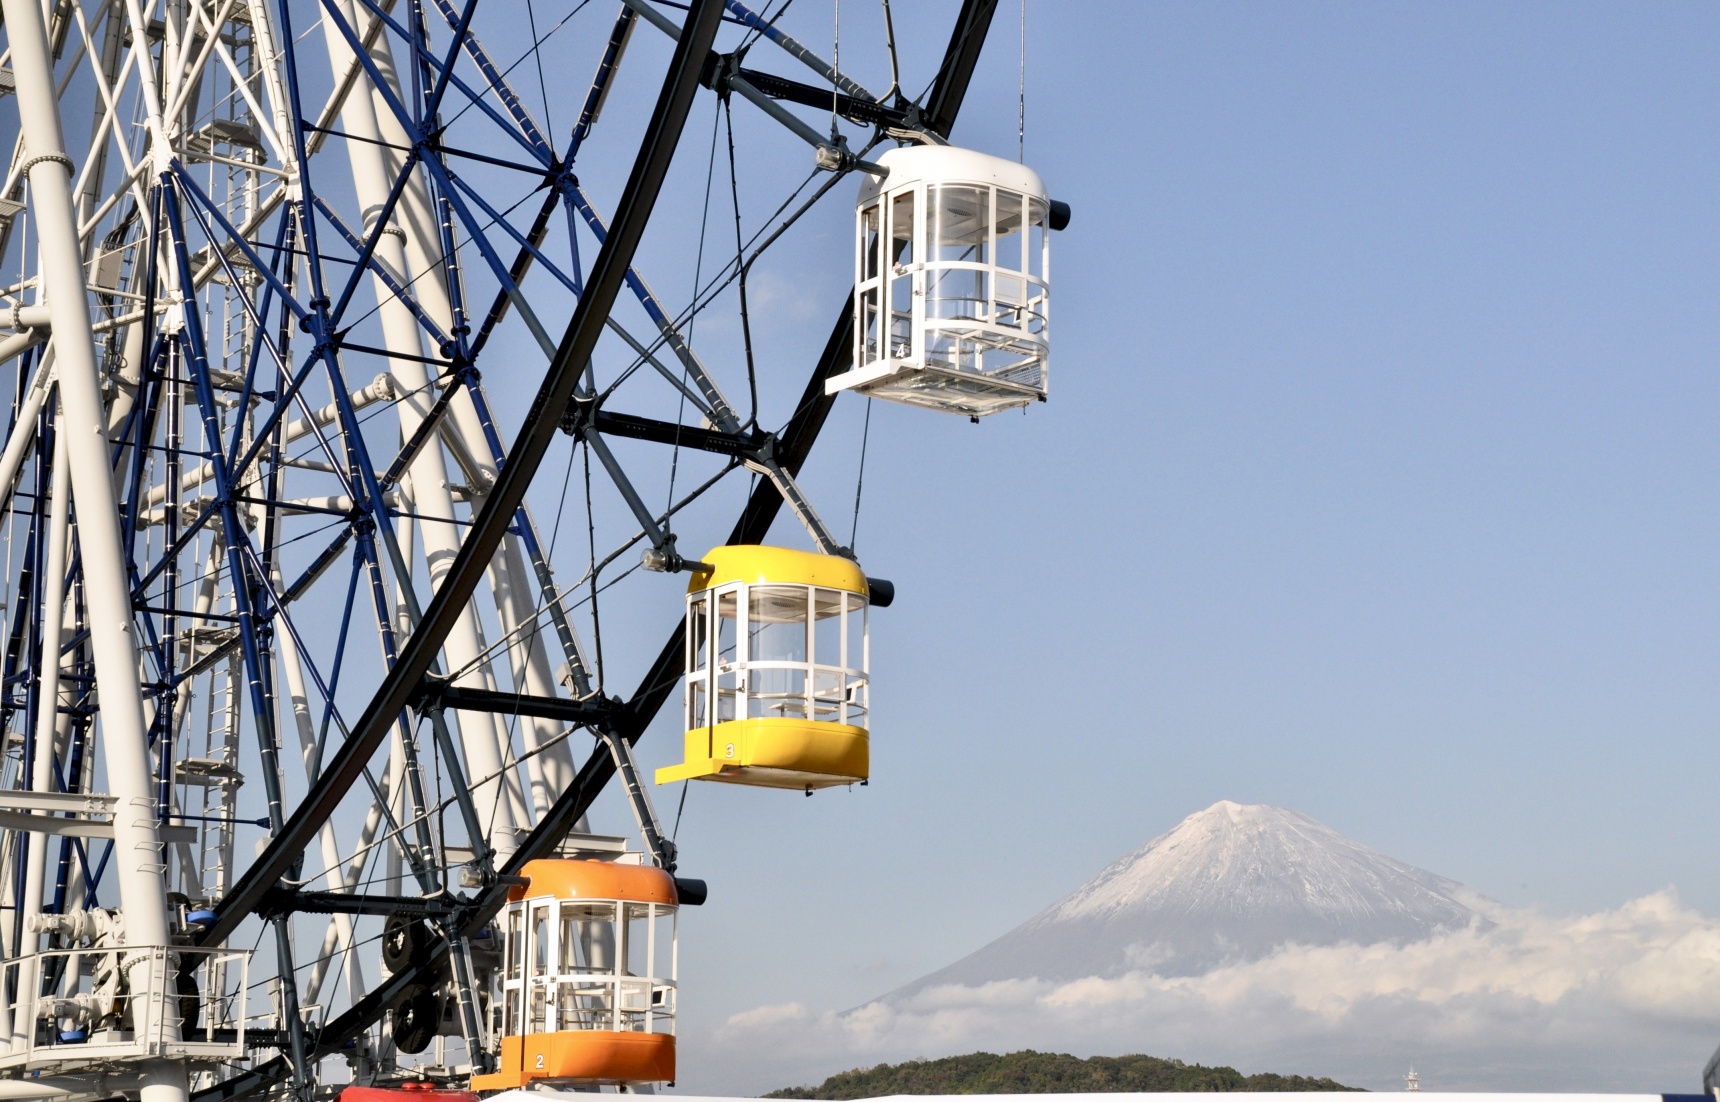 The Ferris Wheel with a Fuji View